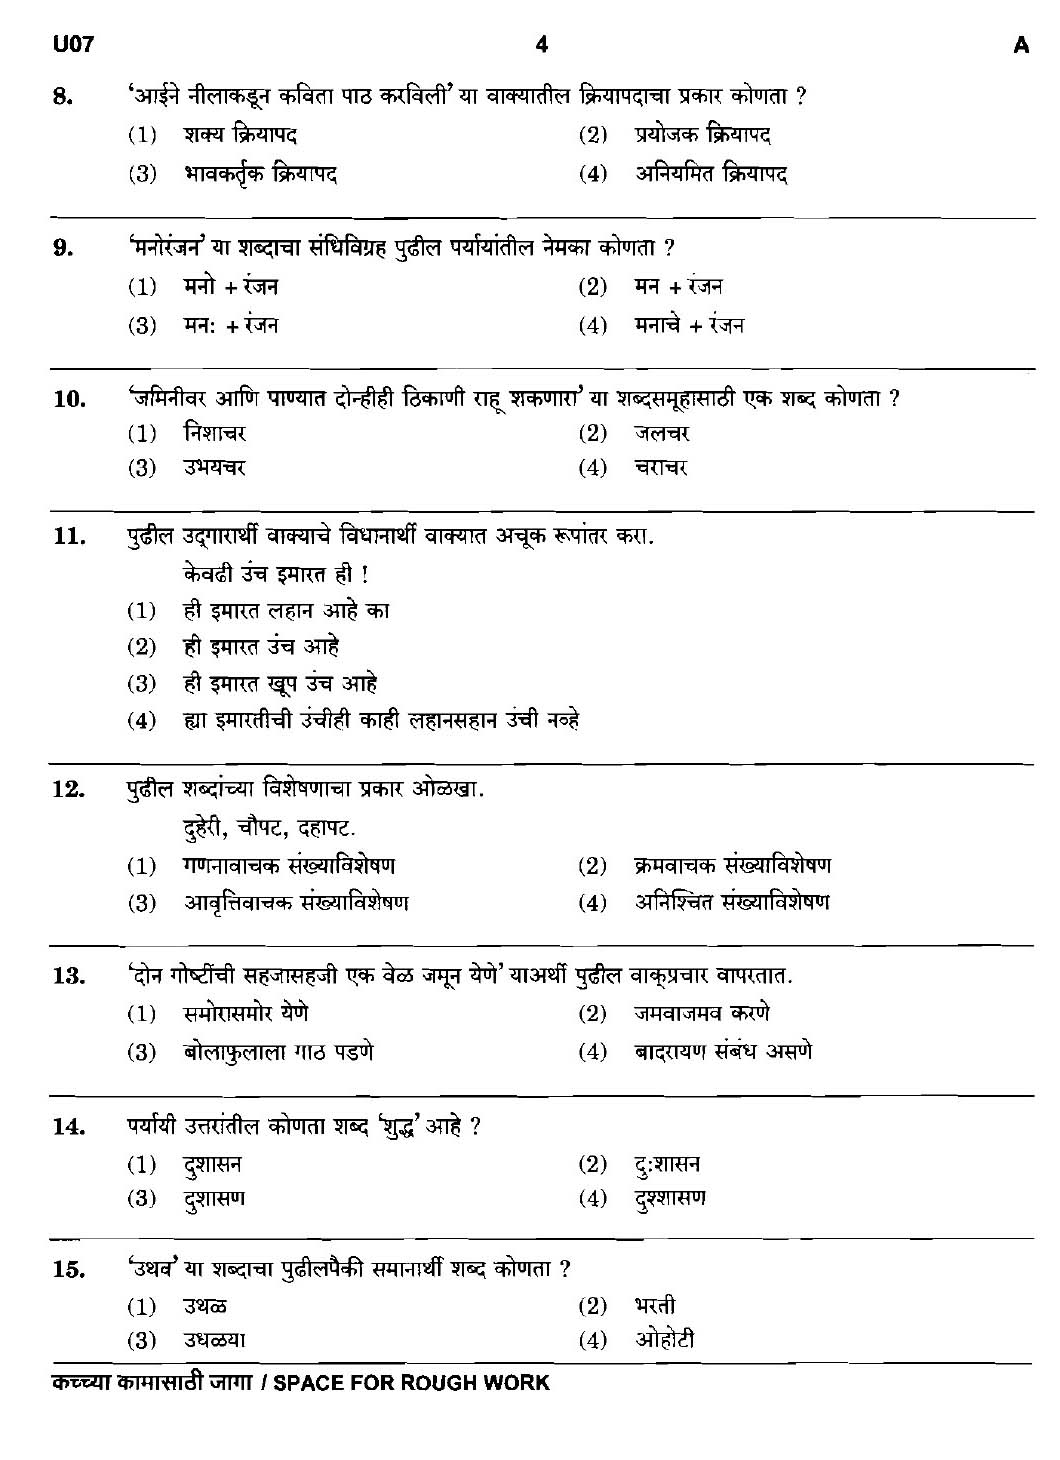 MPSC Agricultural Services Preliminary Exam 2016 Question Paper 3